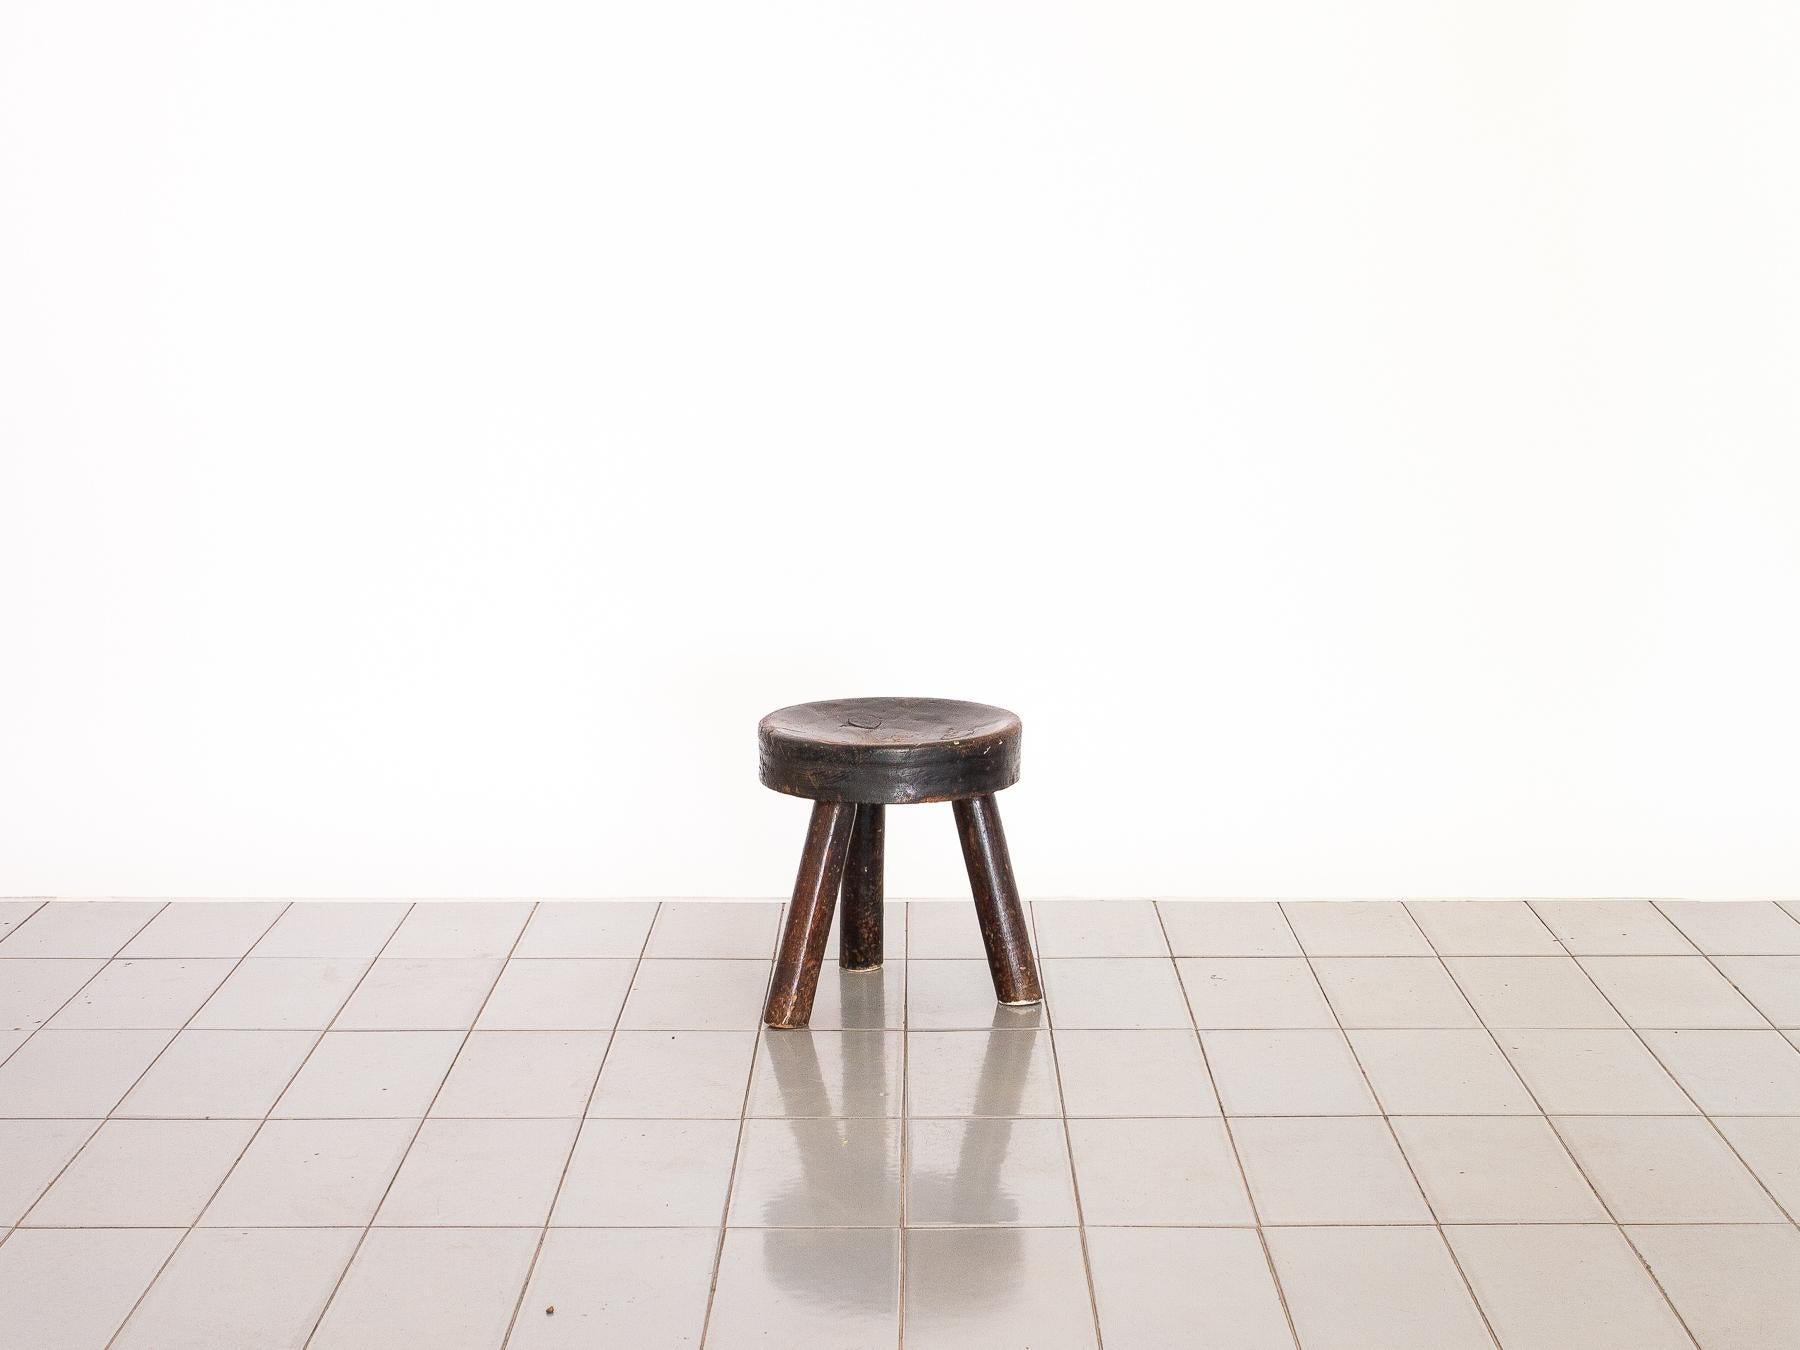 This stool comes from a selection of pieces acquired in a small and distant countryside town. The amazing patina and marks of the passage of time create the unique surface of each of the pieces.